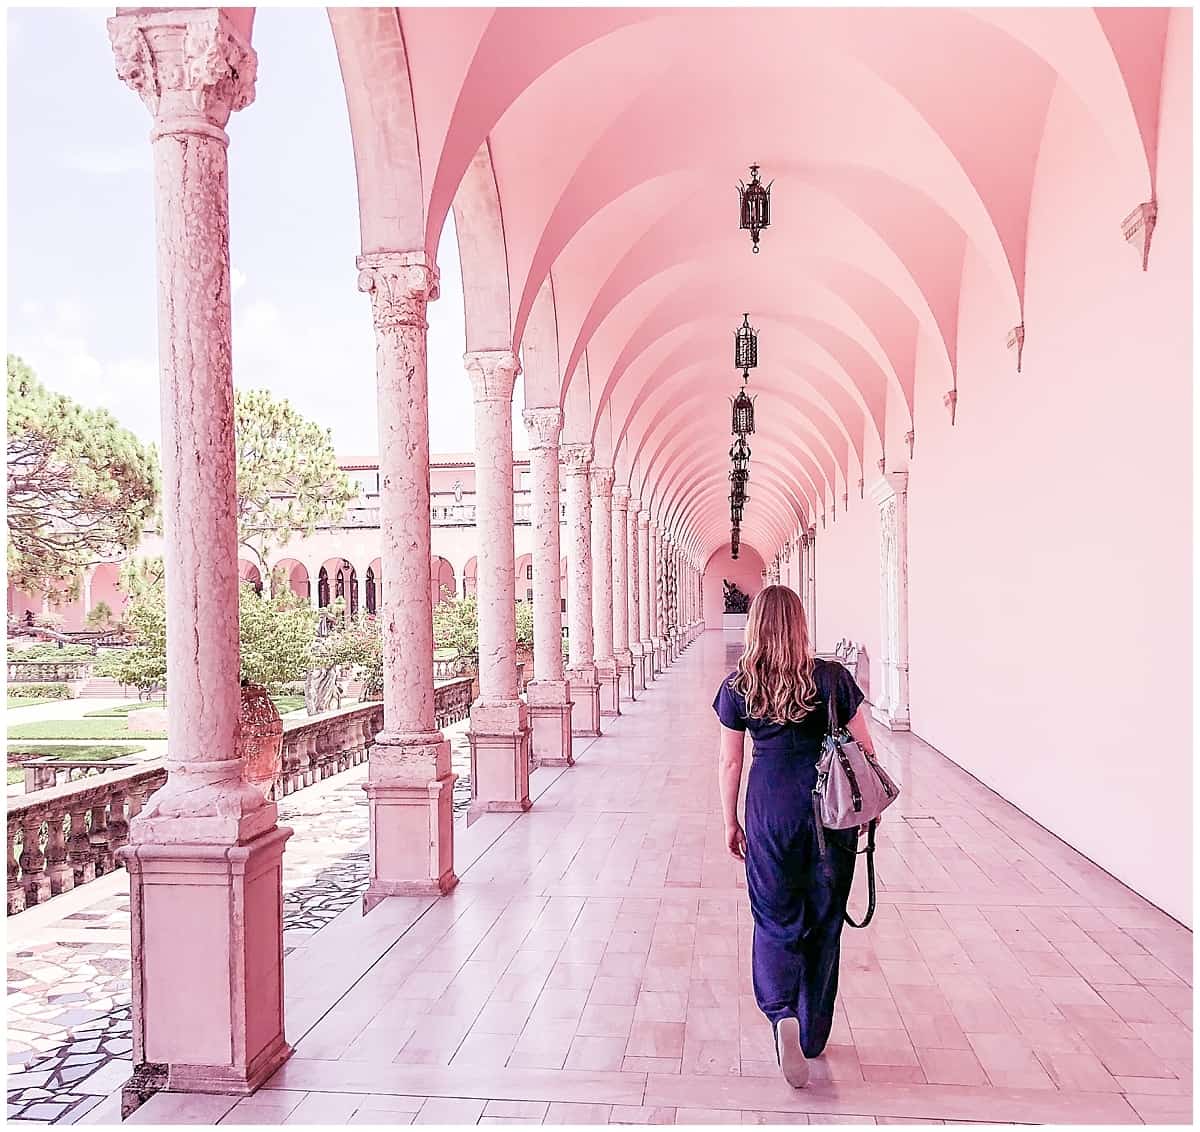 unusual things to do in Sarasota - walking through the pink arches at the Ringling Museum